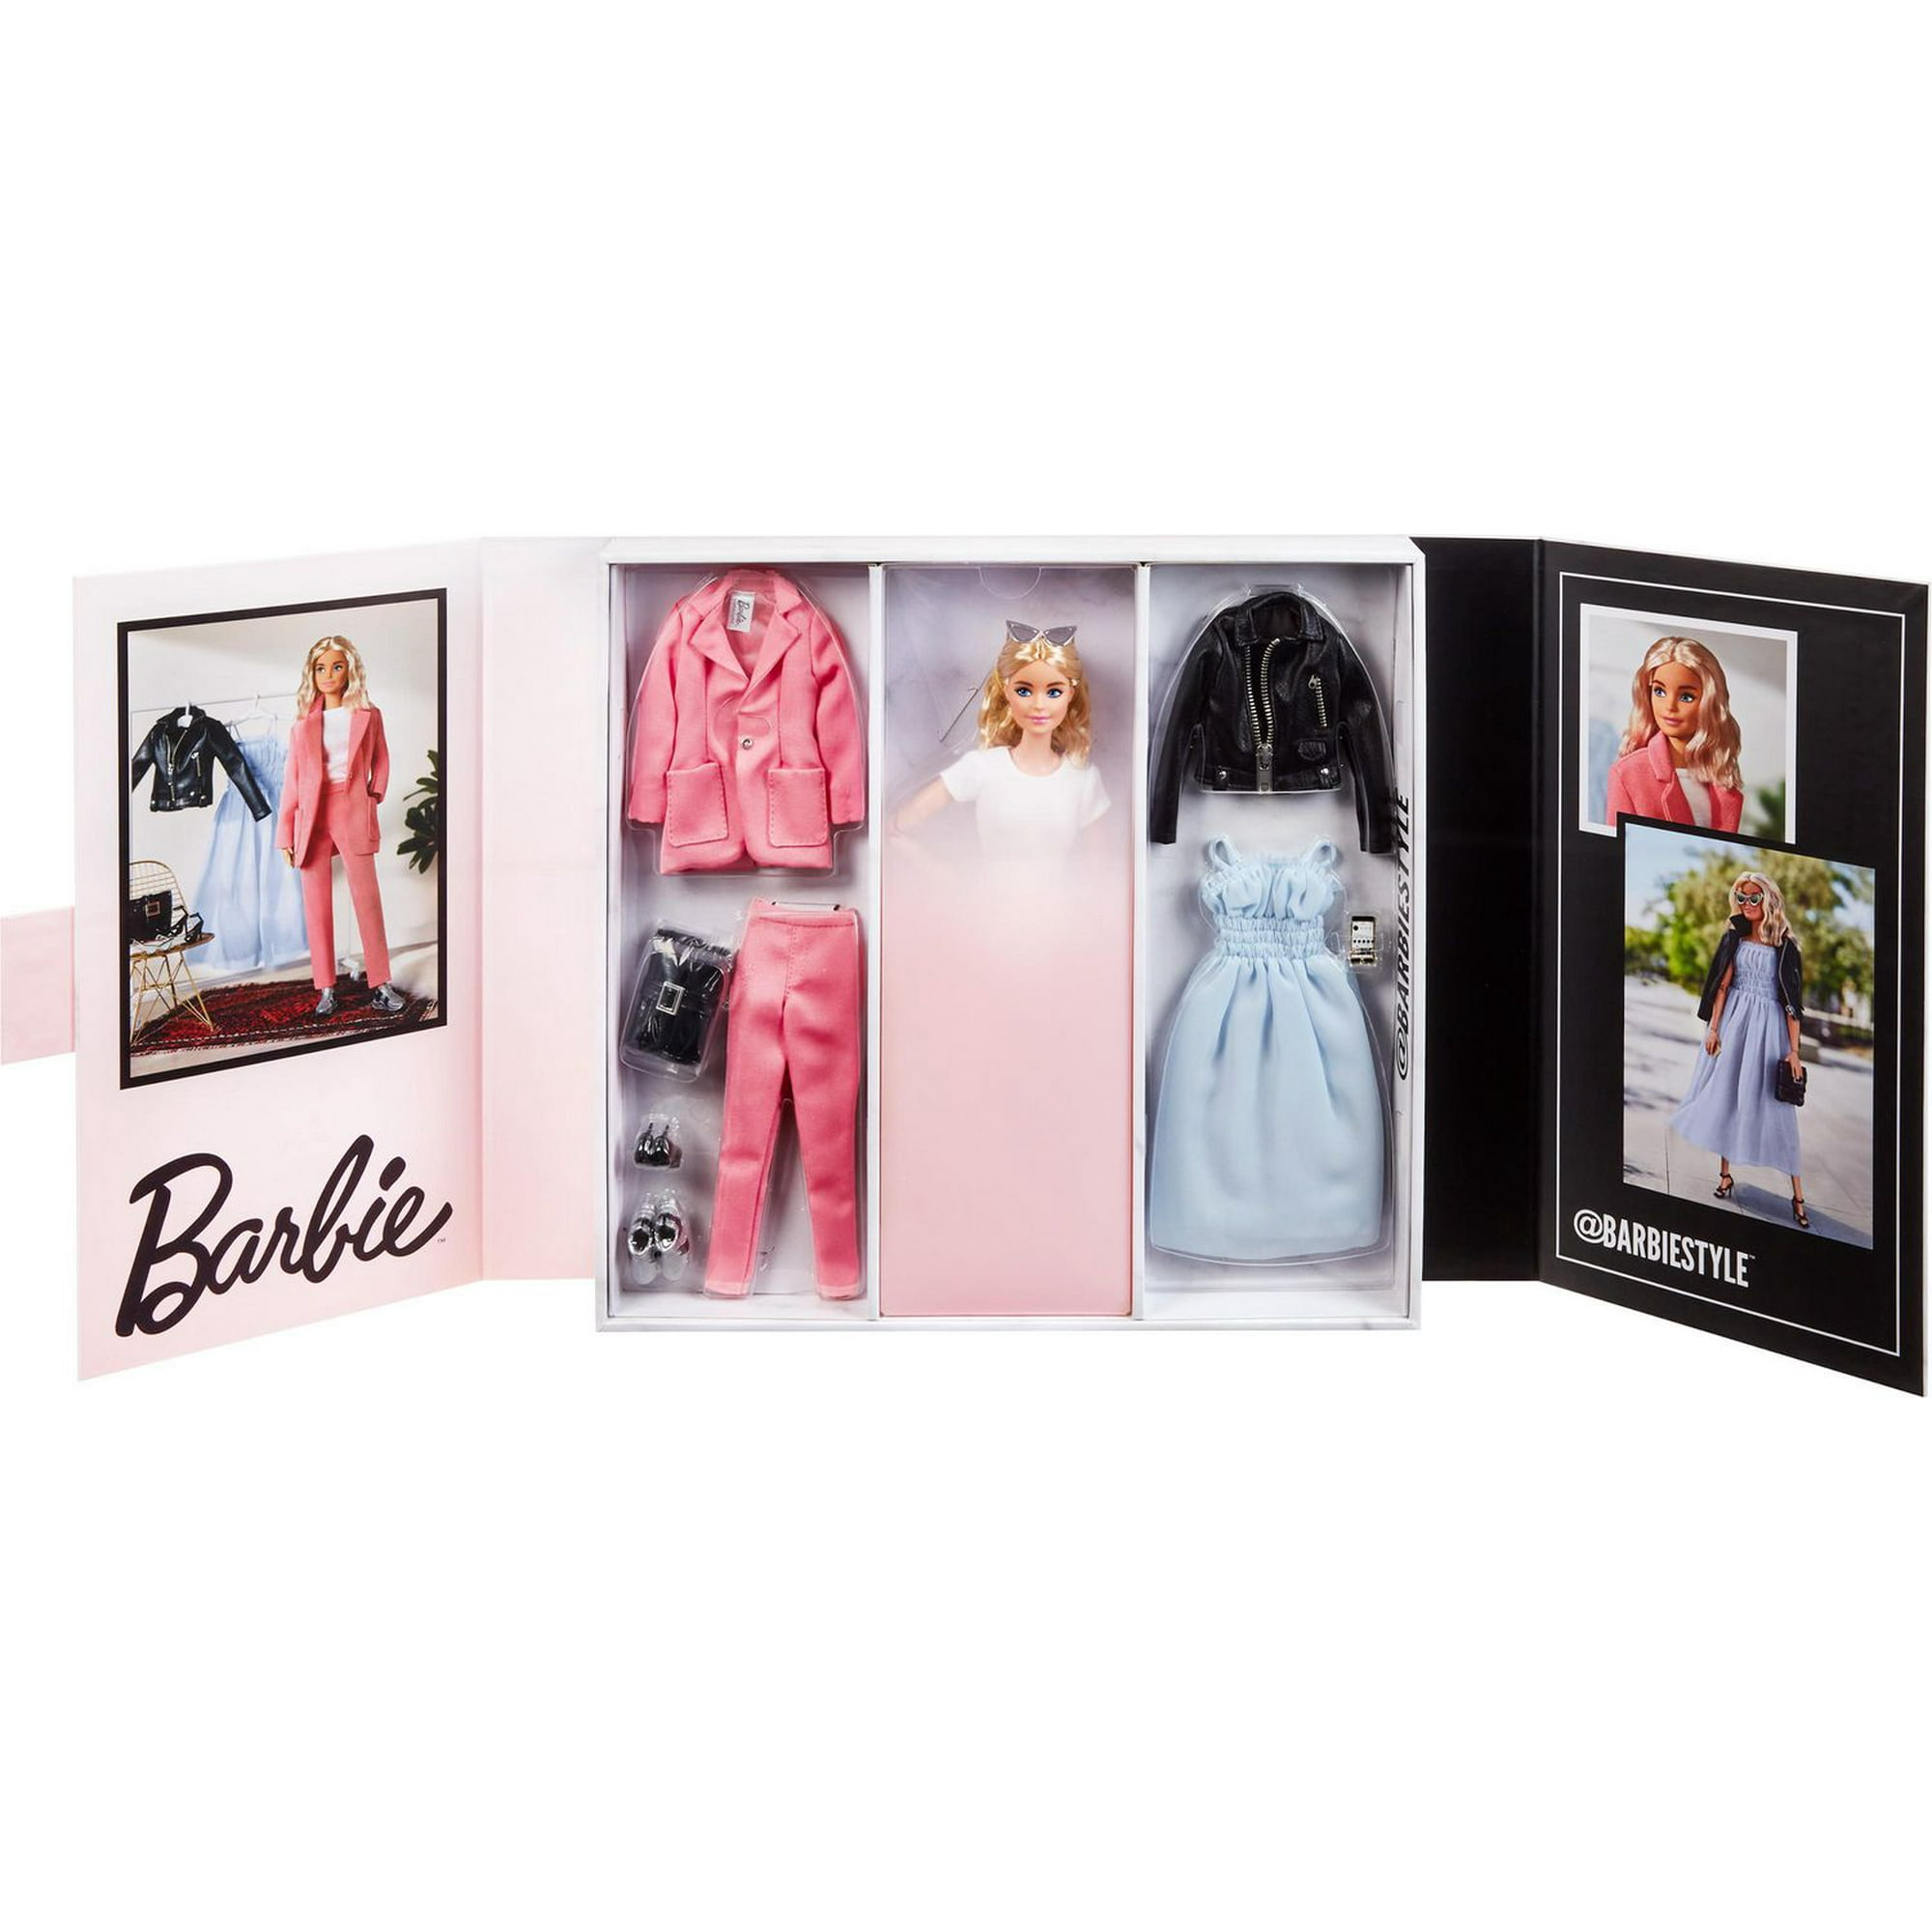 Barbie Signature BarbieStyle Fully Poseable Fashion Doll (12-in Blonde)  with Dress, Top, Pants, 2 Jackets, 2 Pairs of Shoes & Accessories 